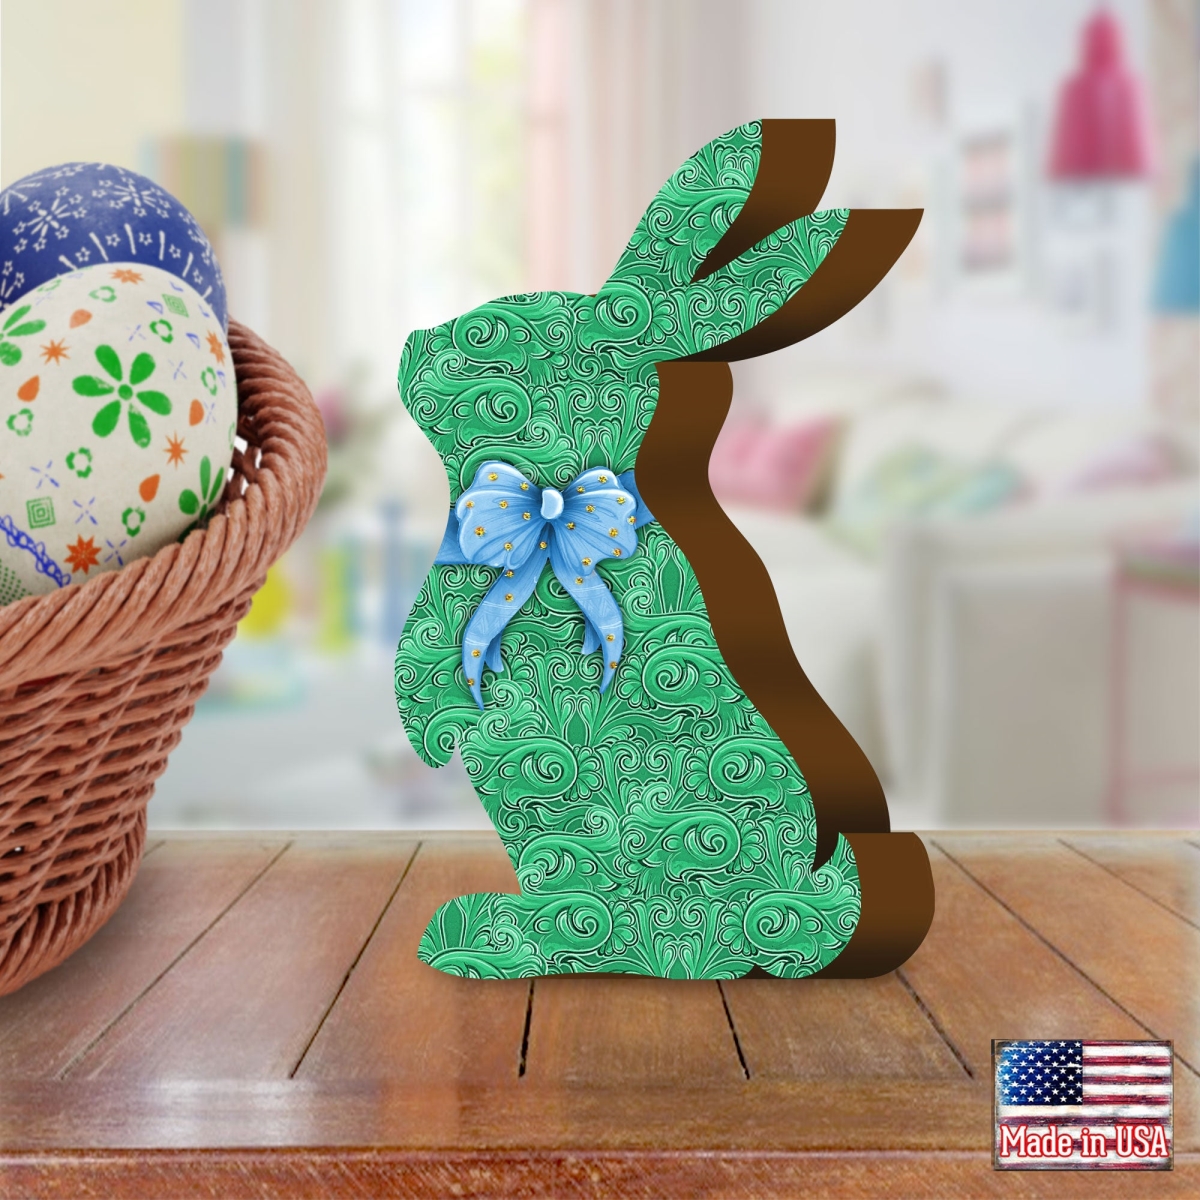 Picture of Designocracy 8154425S 5.5 x 3 in. Quilted Green Bunny Decorative Figurine